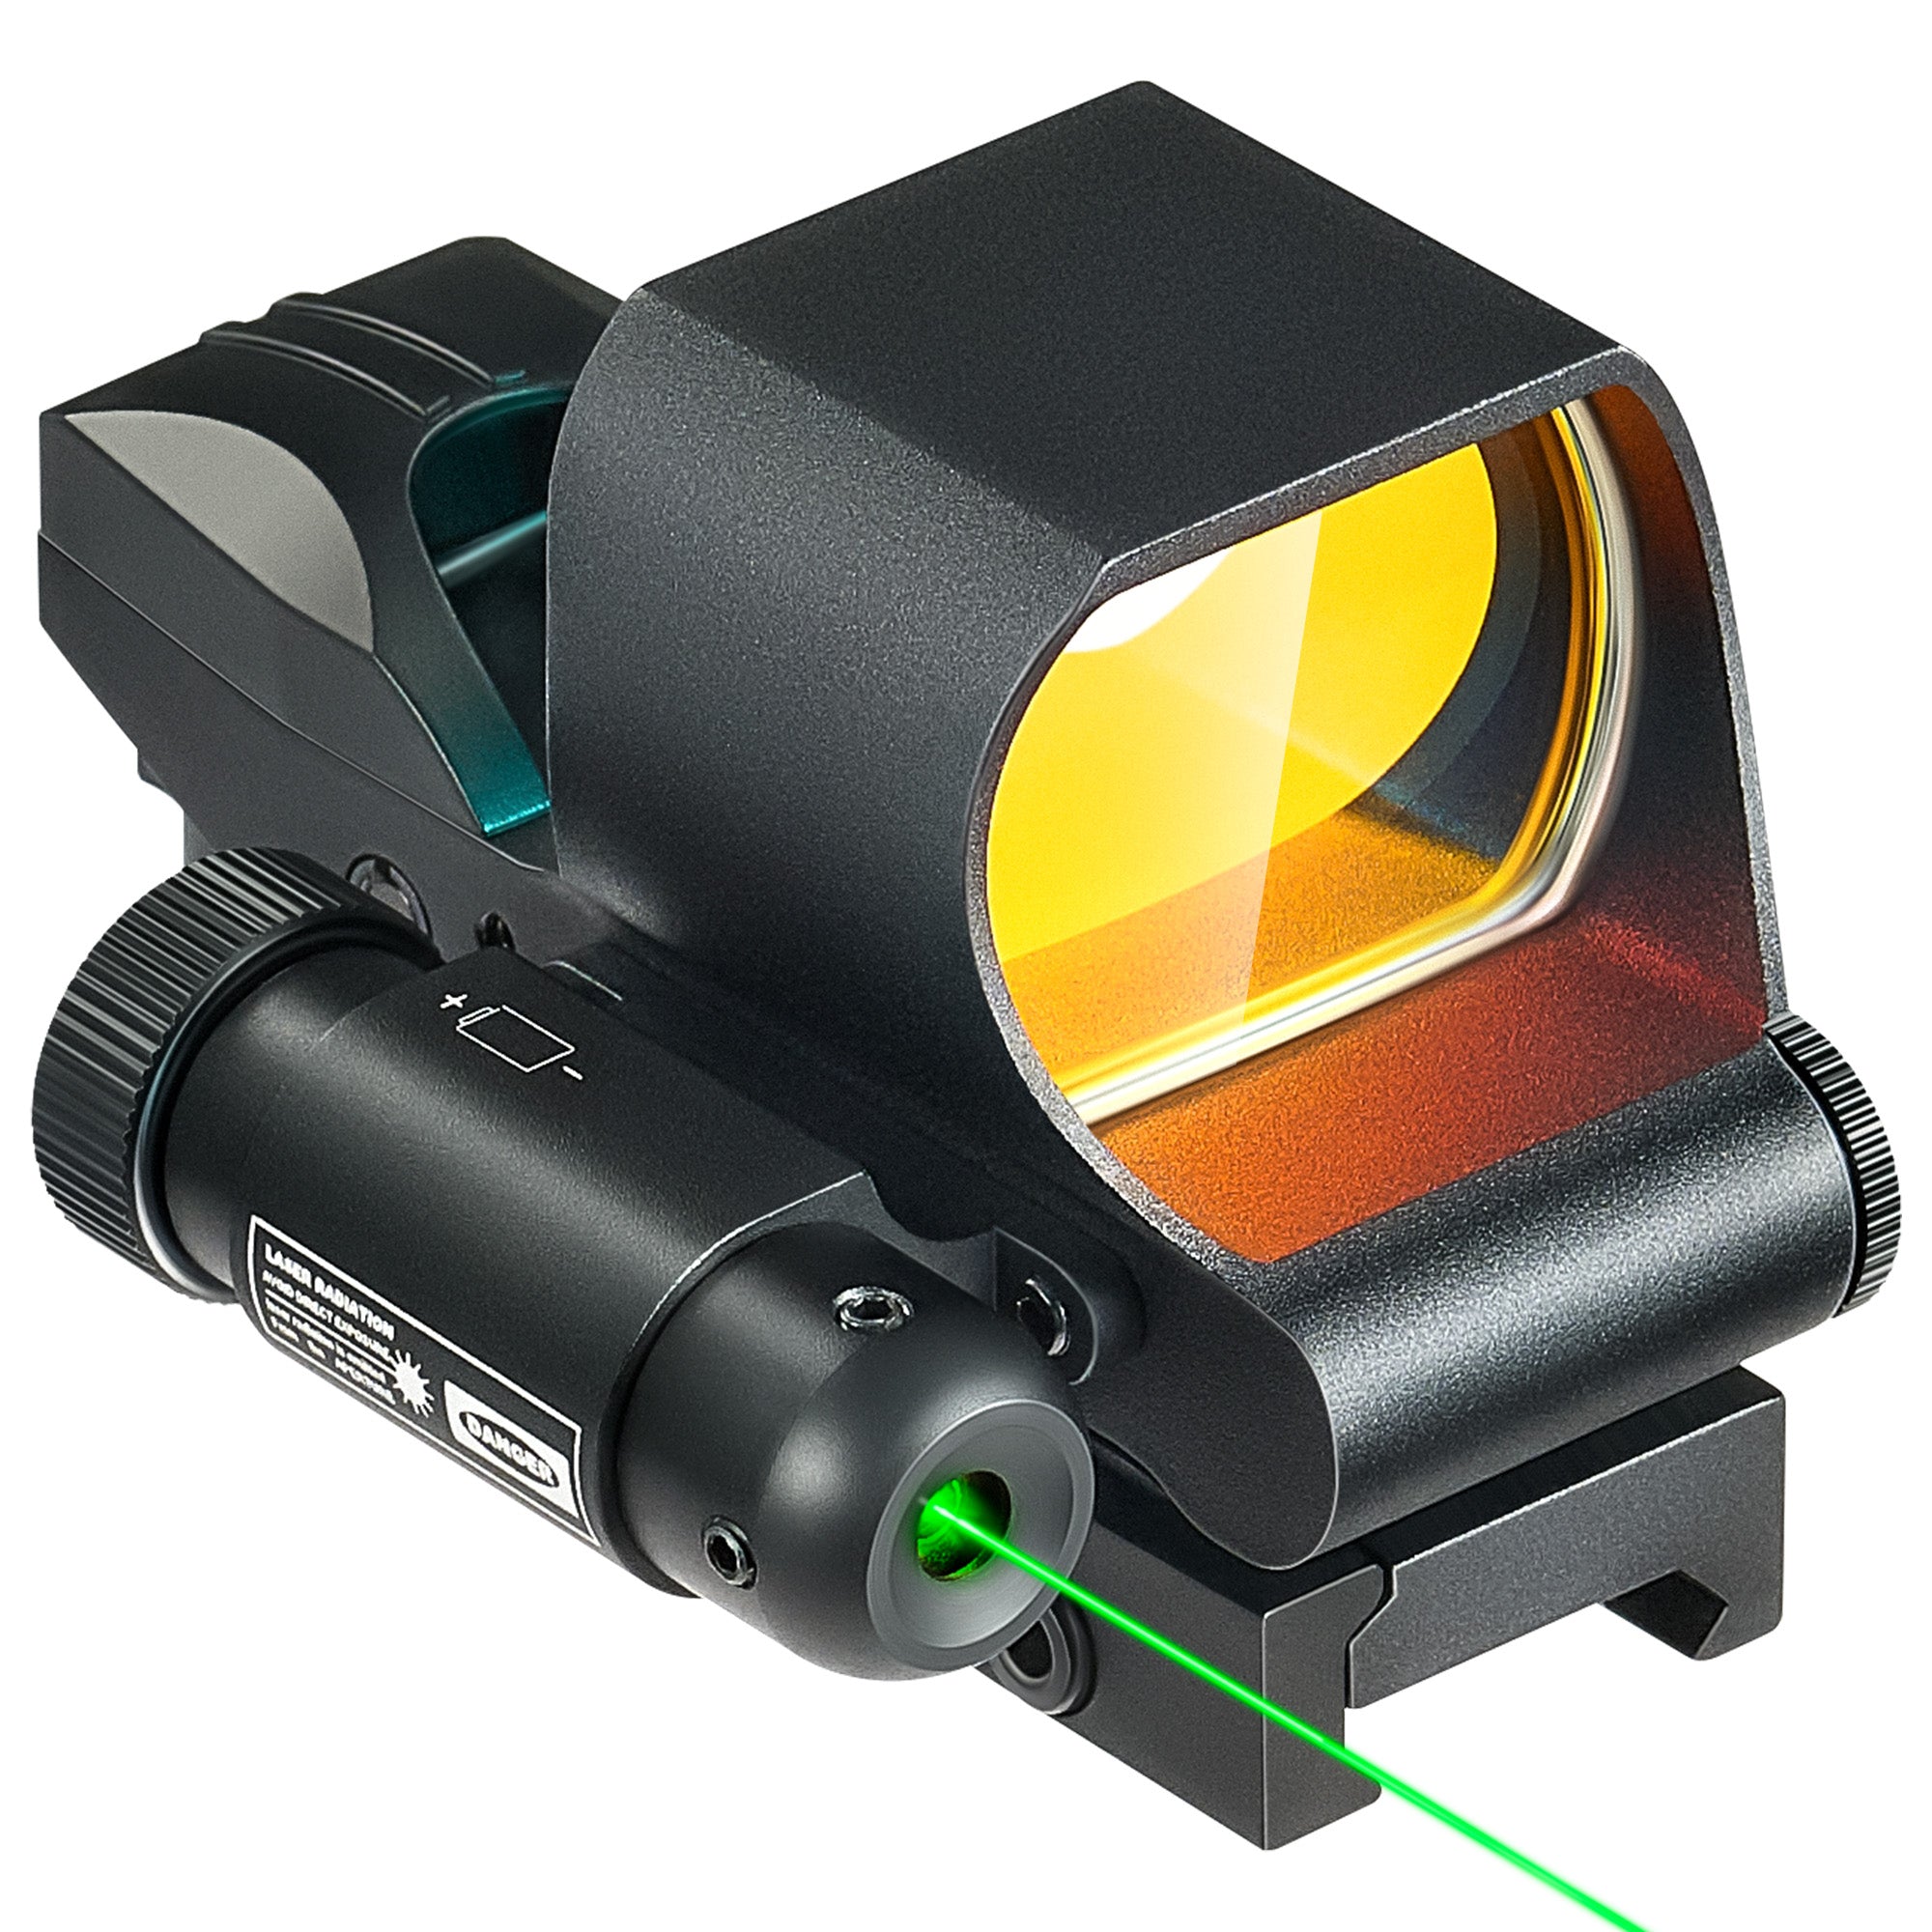 1x28mm Reflex Sight Green Laser Combo, 3 MOA Red Dot Sight with 5 Brightness Levels